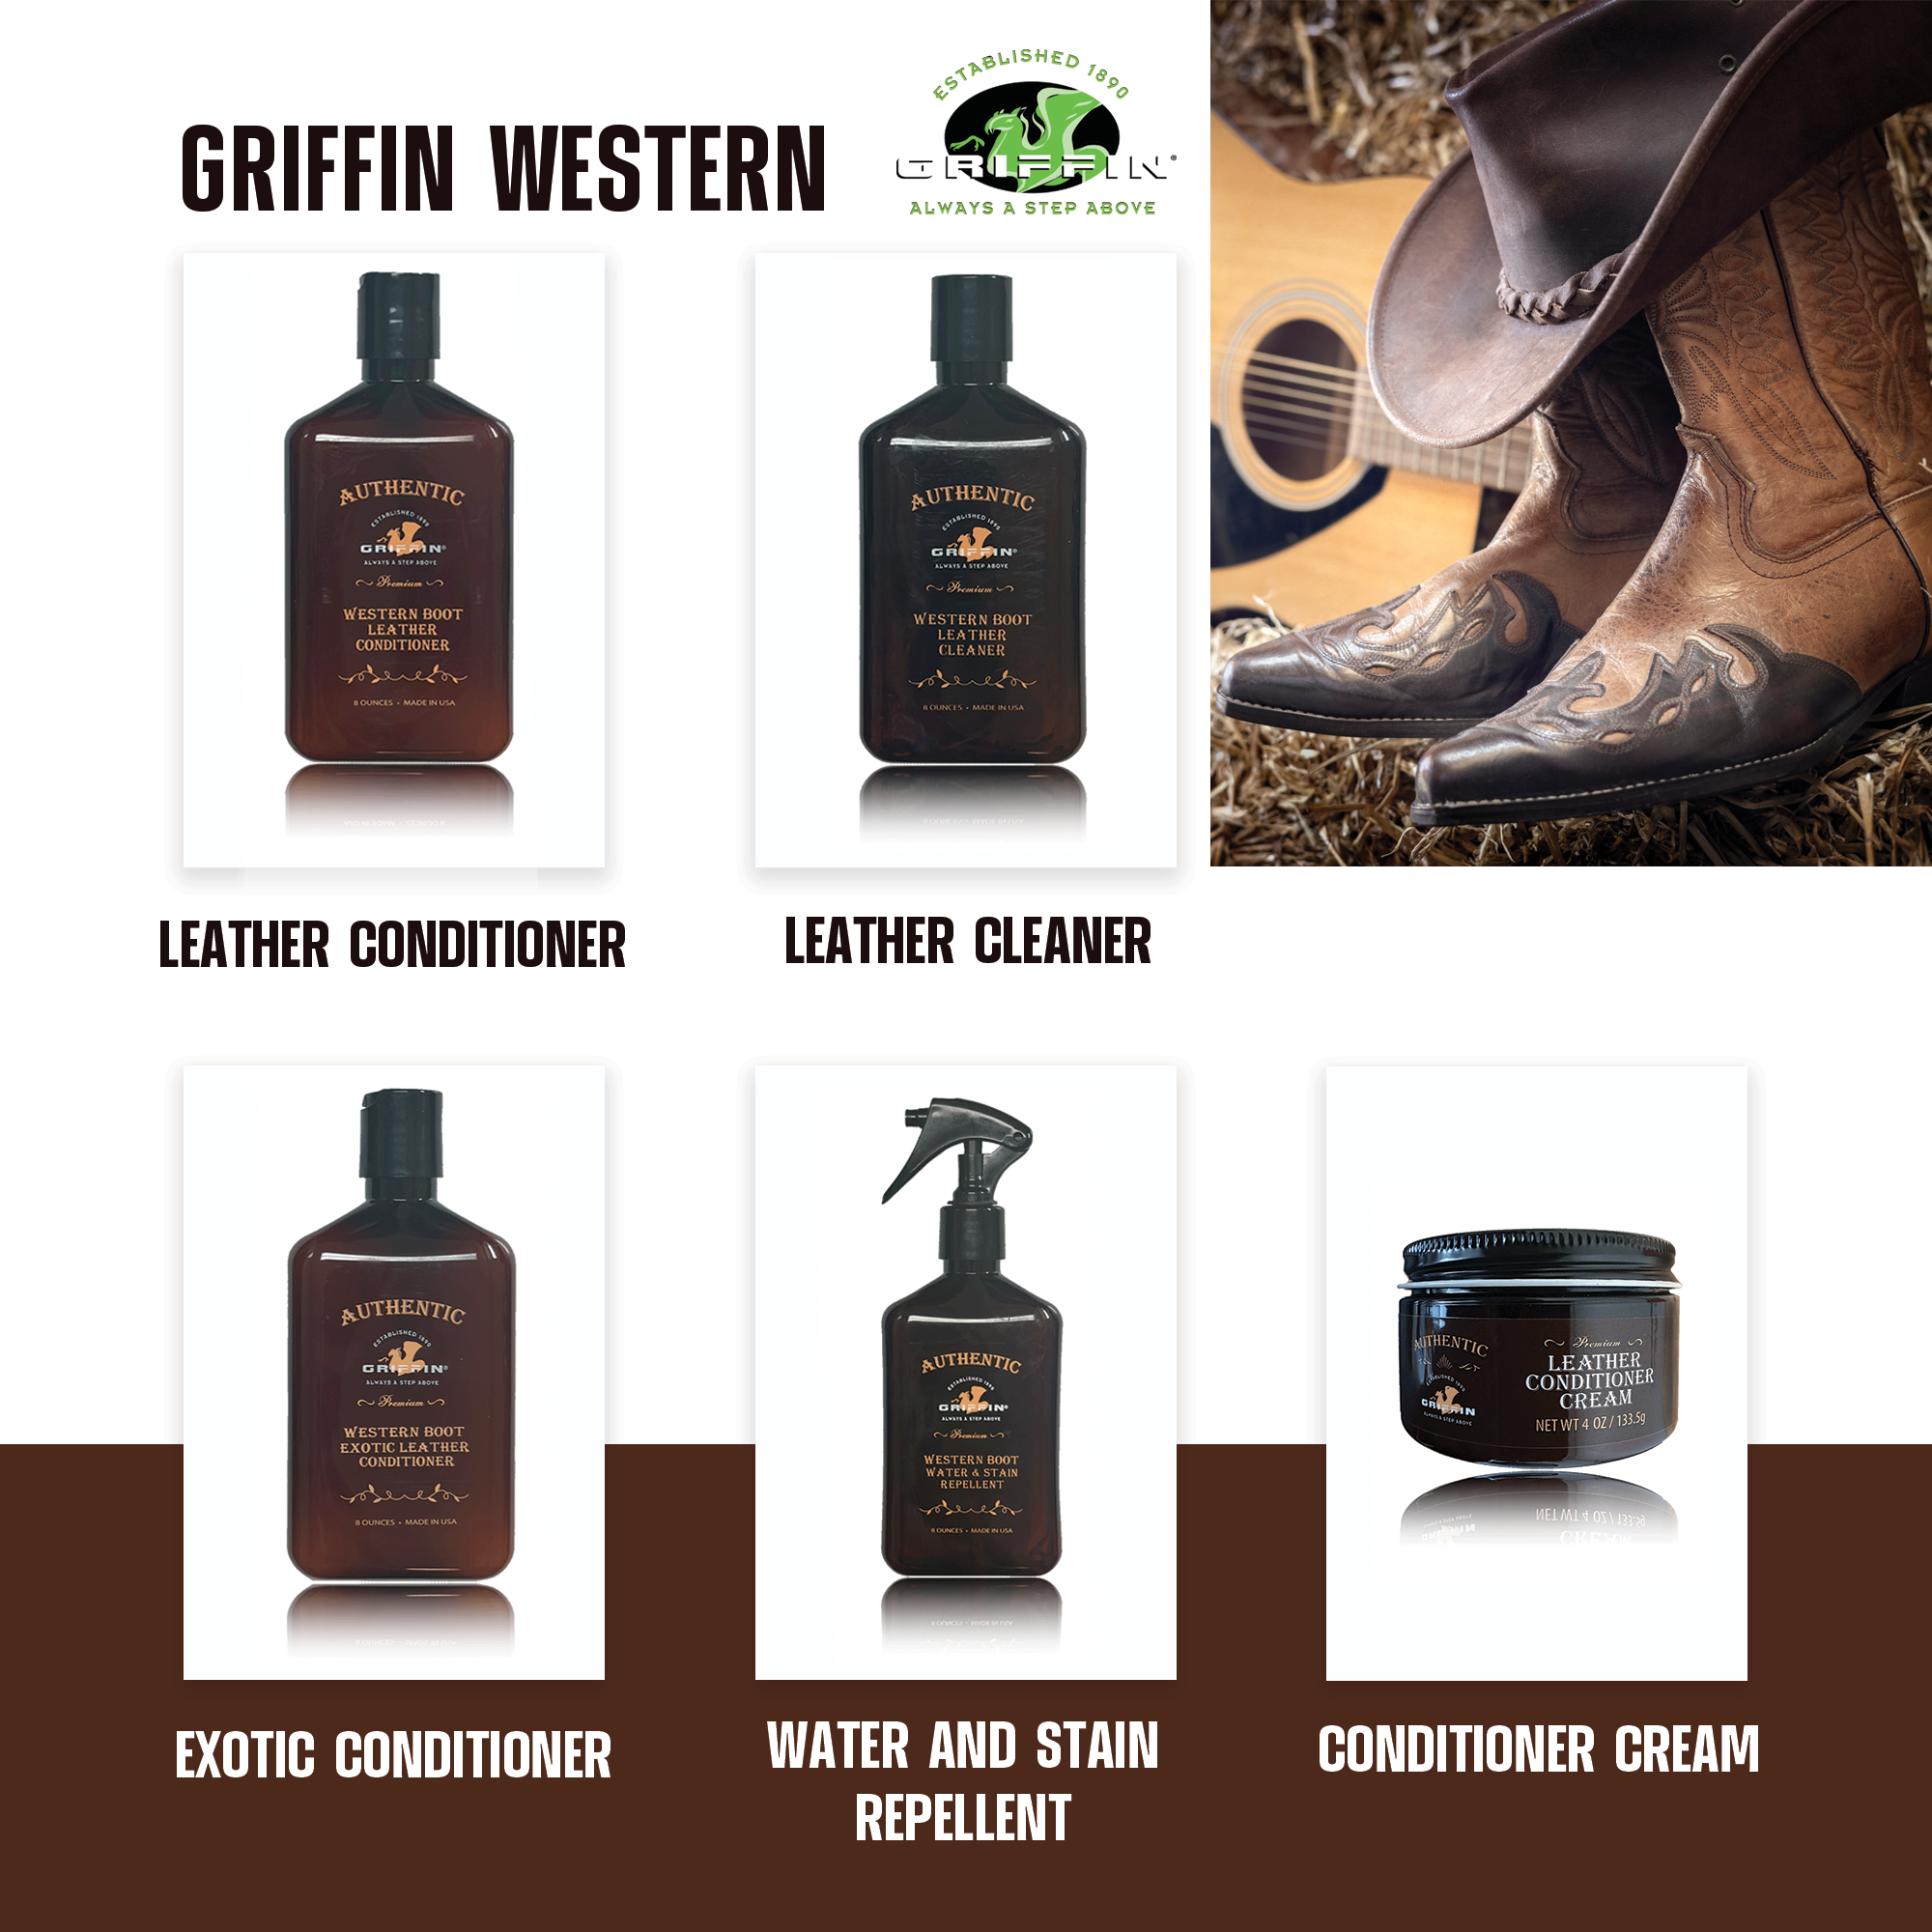 Western Boot Water and Stain Repellent